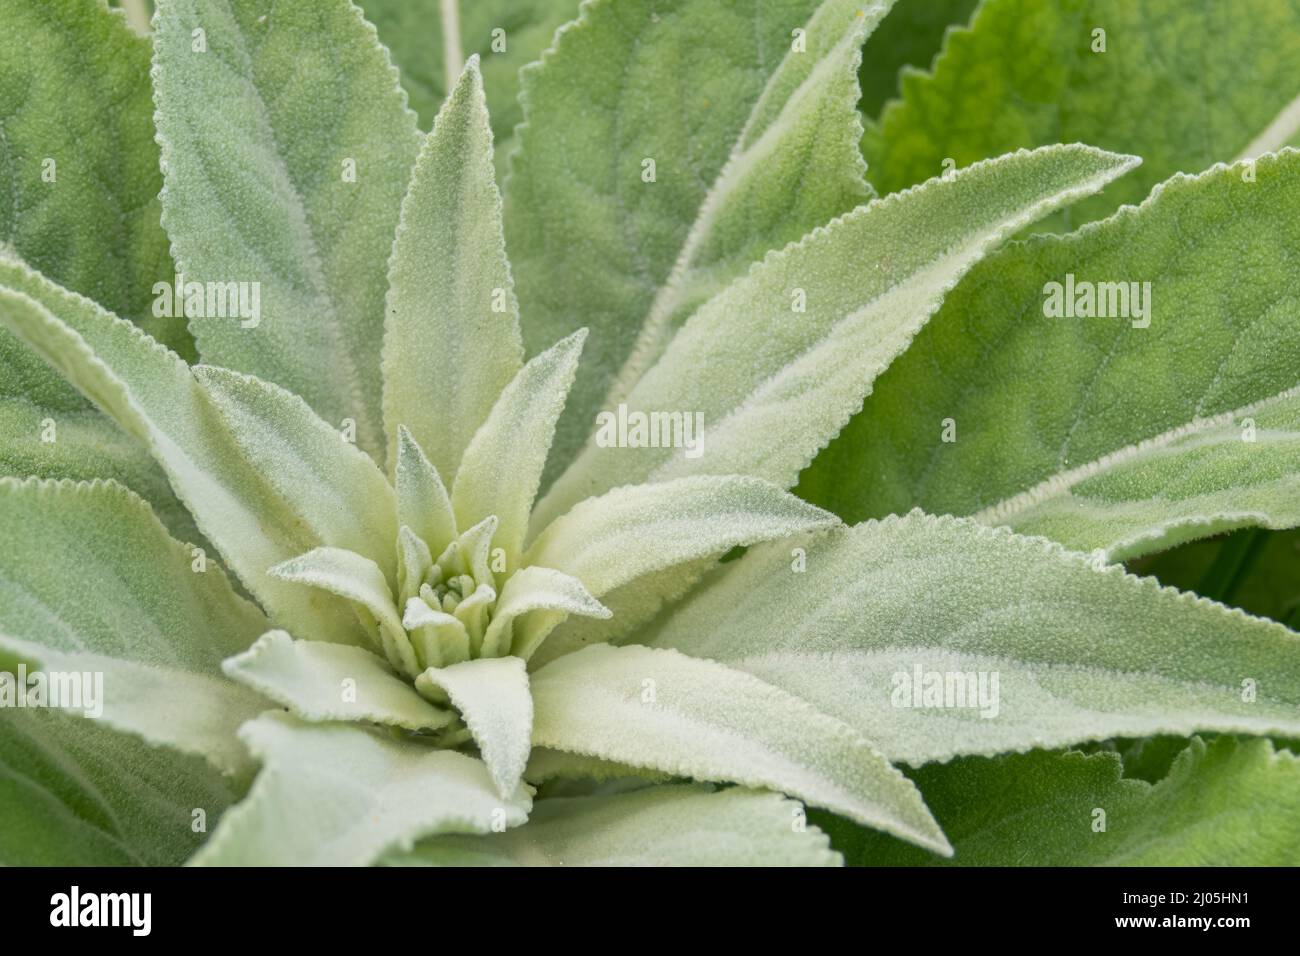 mullein plant growing outside in spring close up view Stock Photo